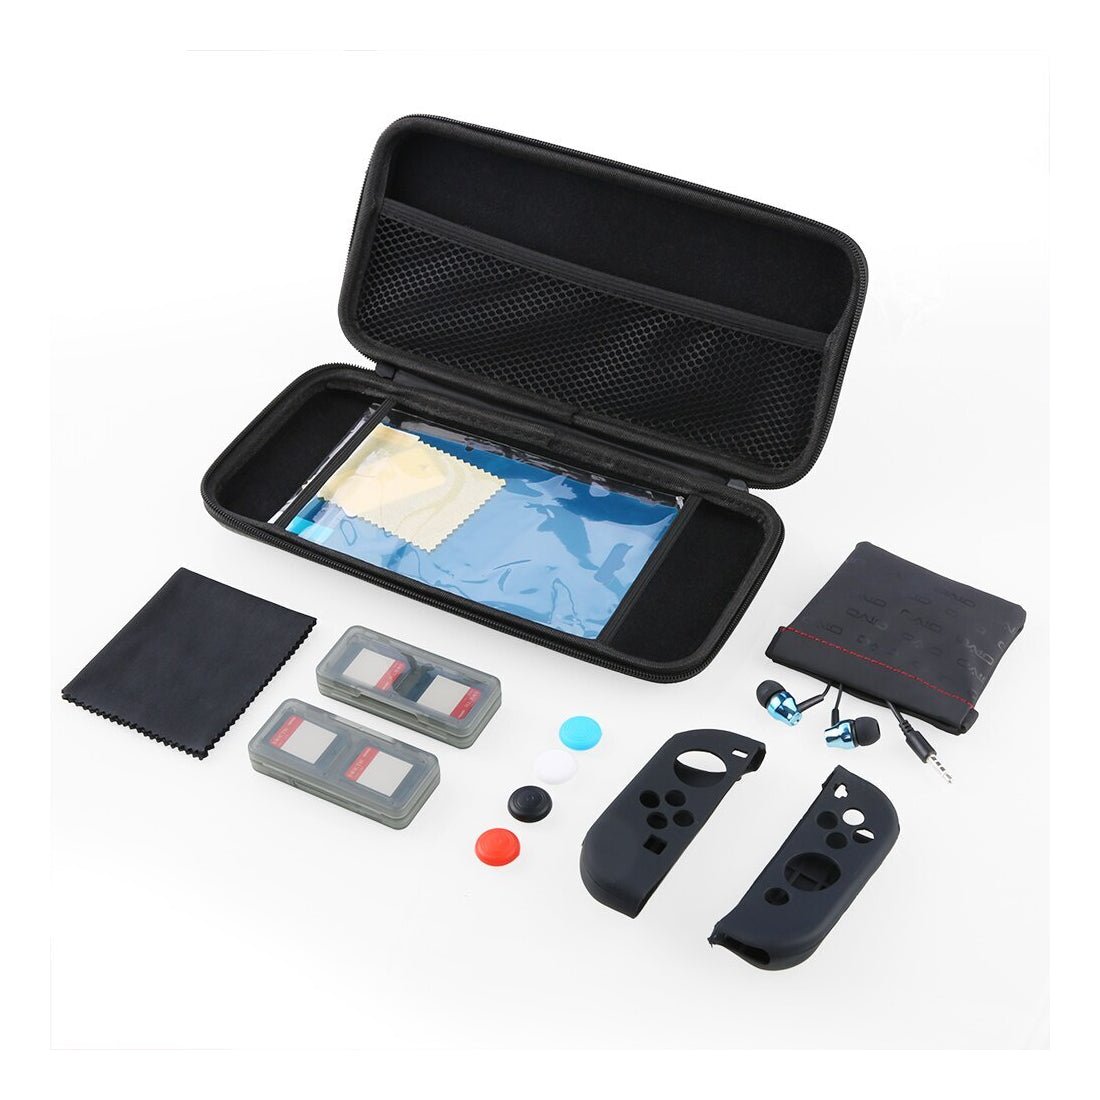 OIVO 13 In 1 Super Kit For Nintendo Switch - Store 974 | ستور ٩٧٤